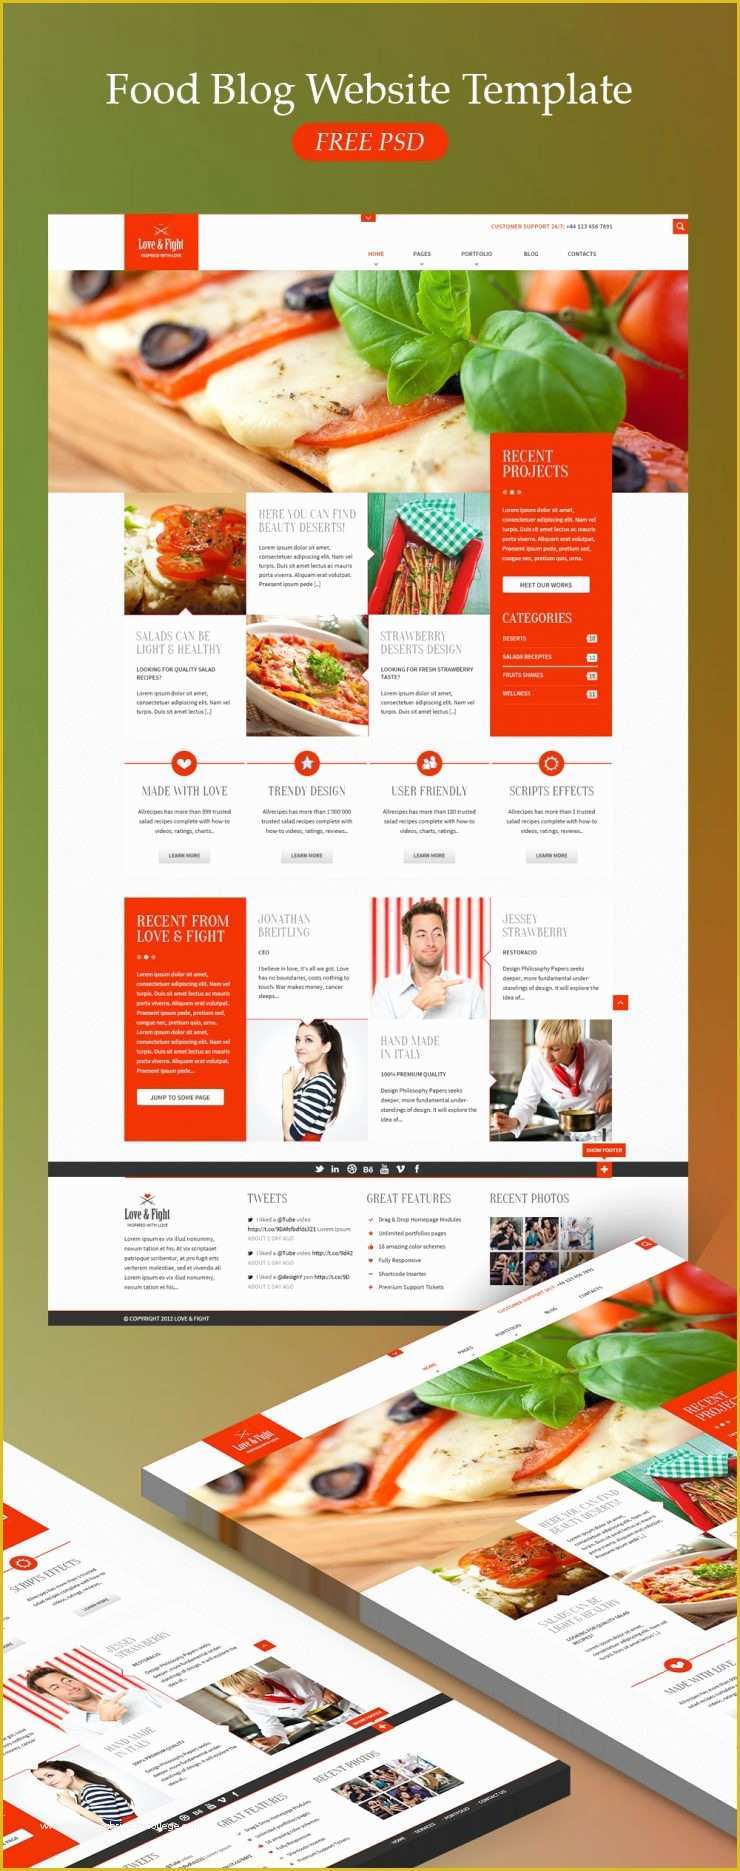 Cooking Website Templates Free Download Of Food Blog Website Template Free Psd Download Psd